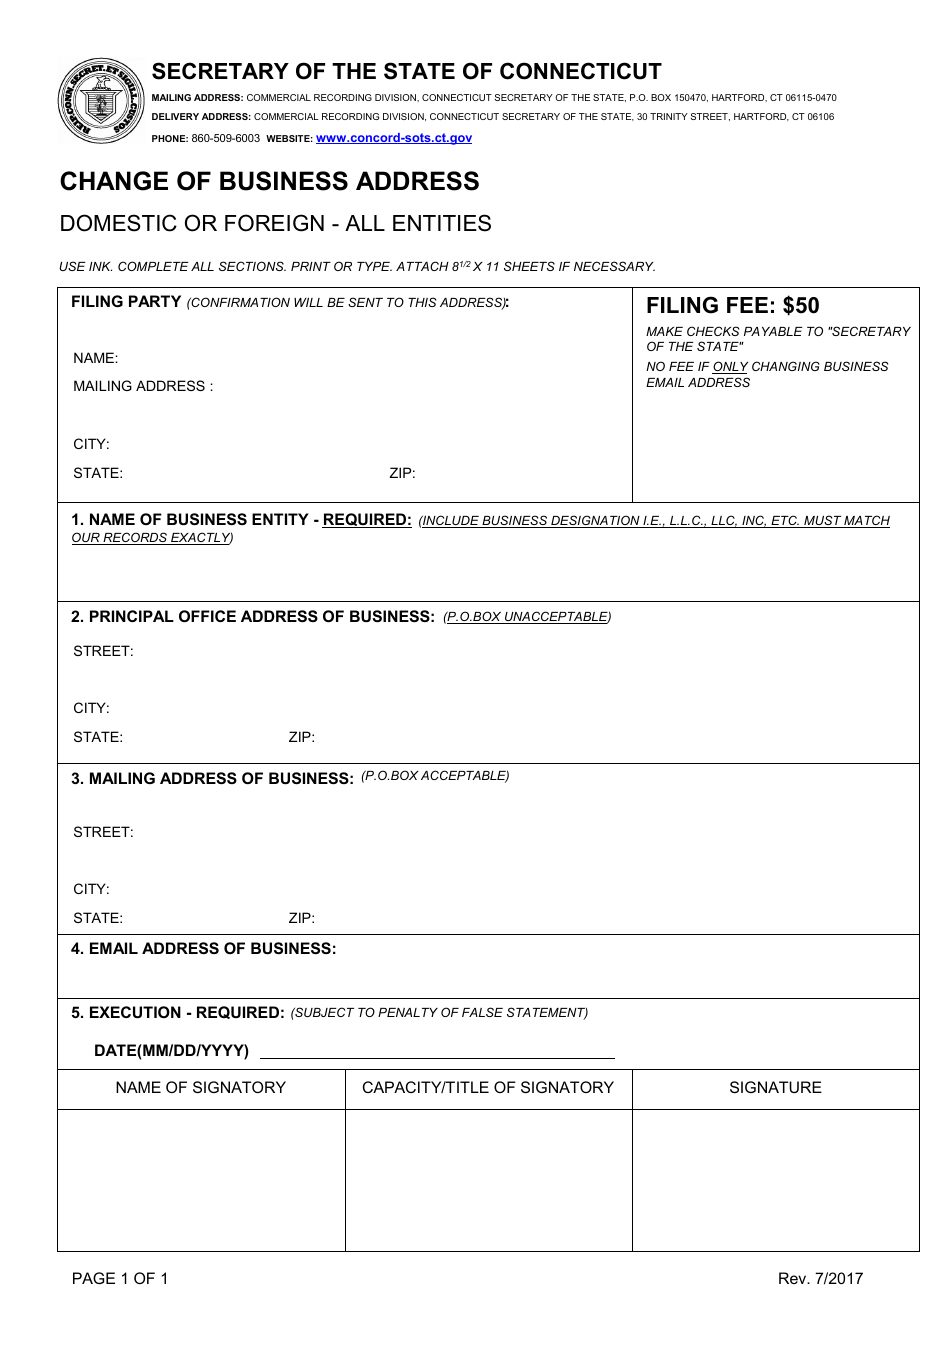 Change of Business Address - Domestic or Foreign - All Entities - Connecticut, Page 1